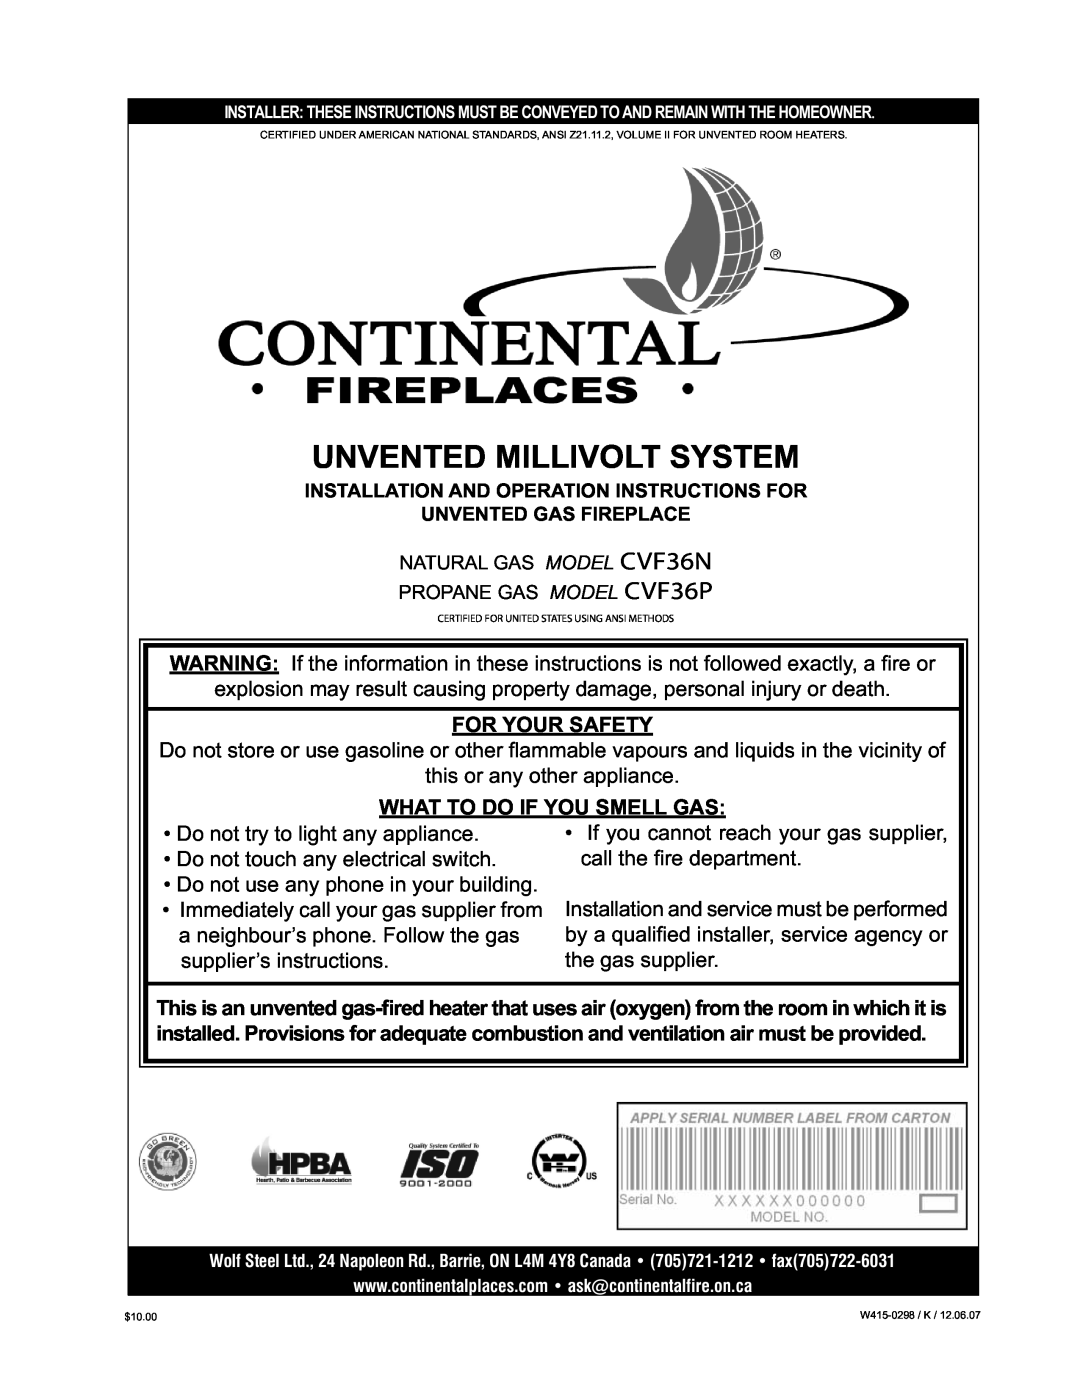 Continental manual For Your Safety, What To Do If You Smell Gas, Unvented Millivolt System, CVF36N CVF36P 